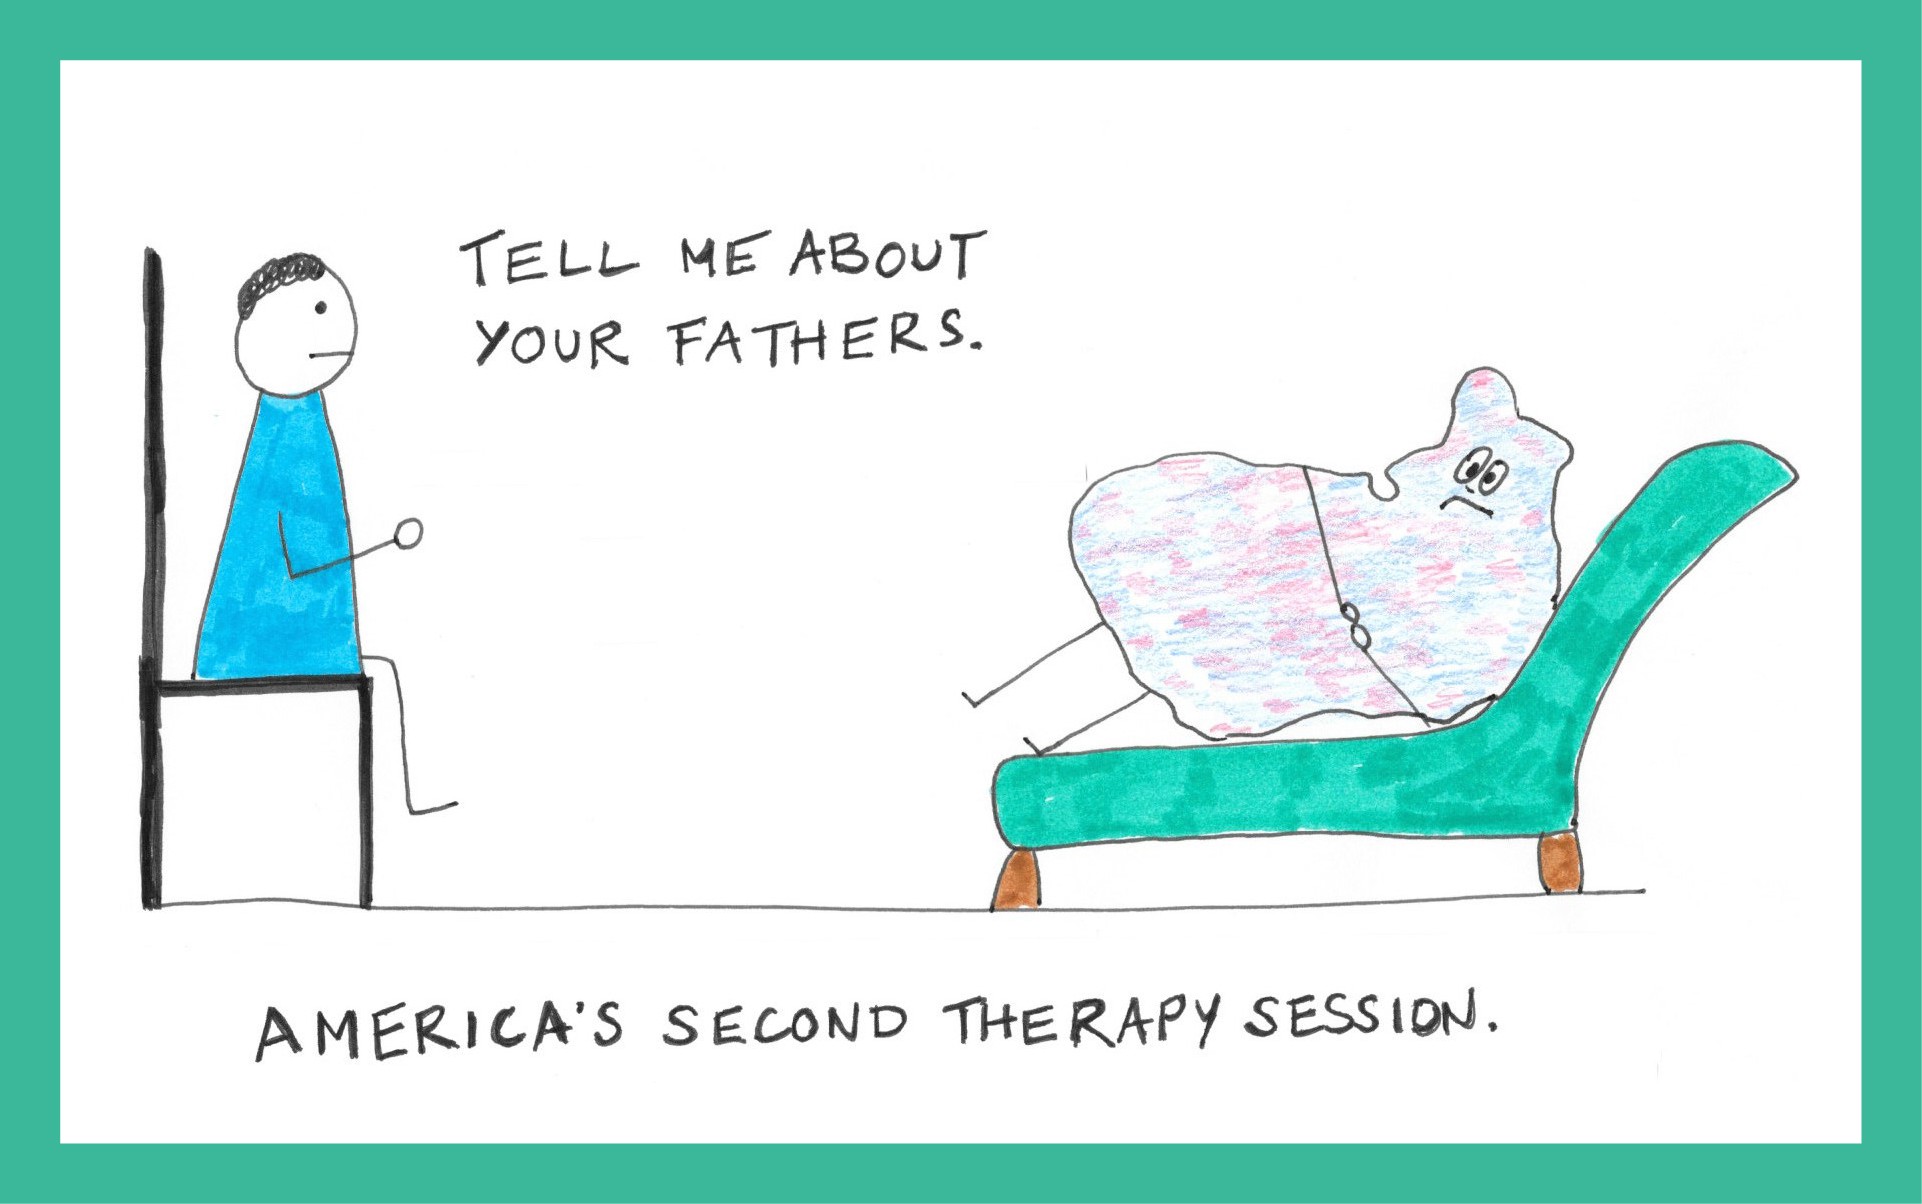 America's Second Therapy Session